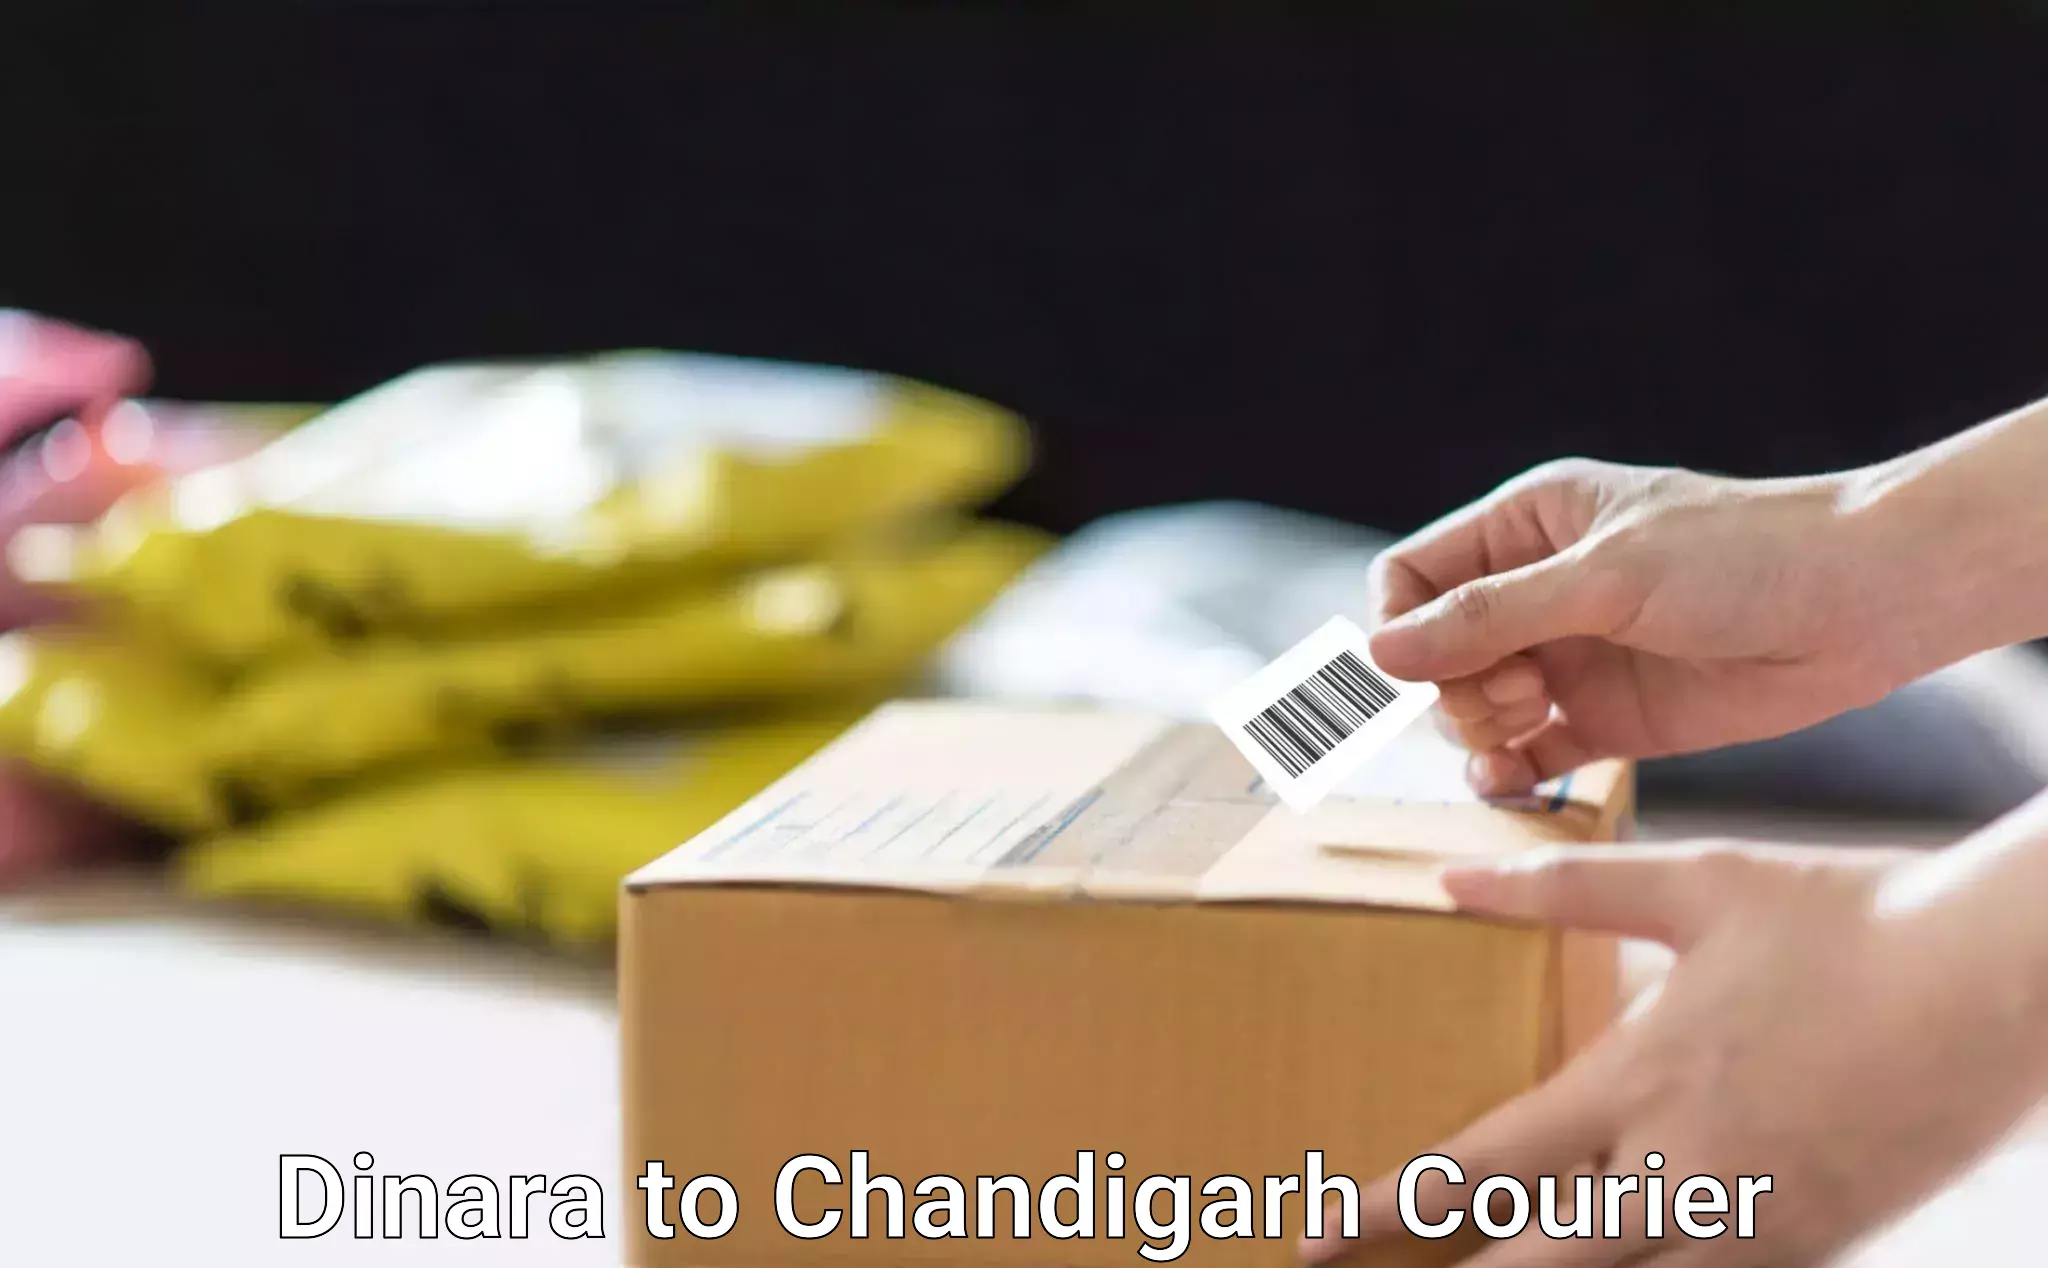 Quality relocation assistance in Dinara to Chandigarh